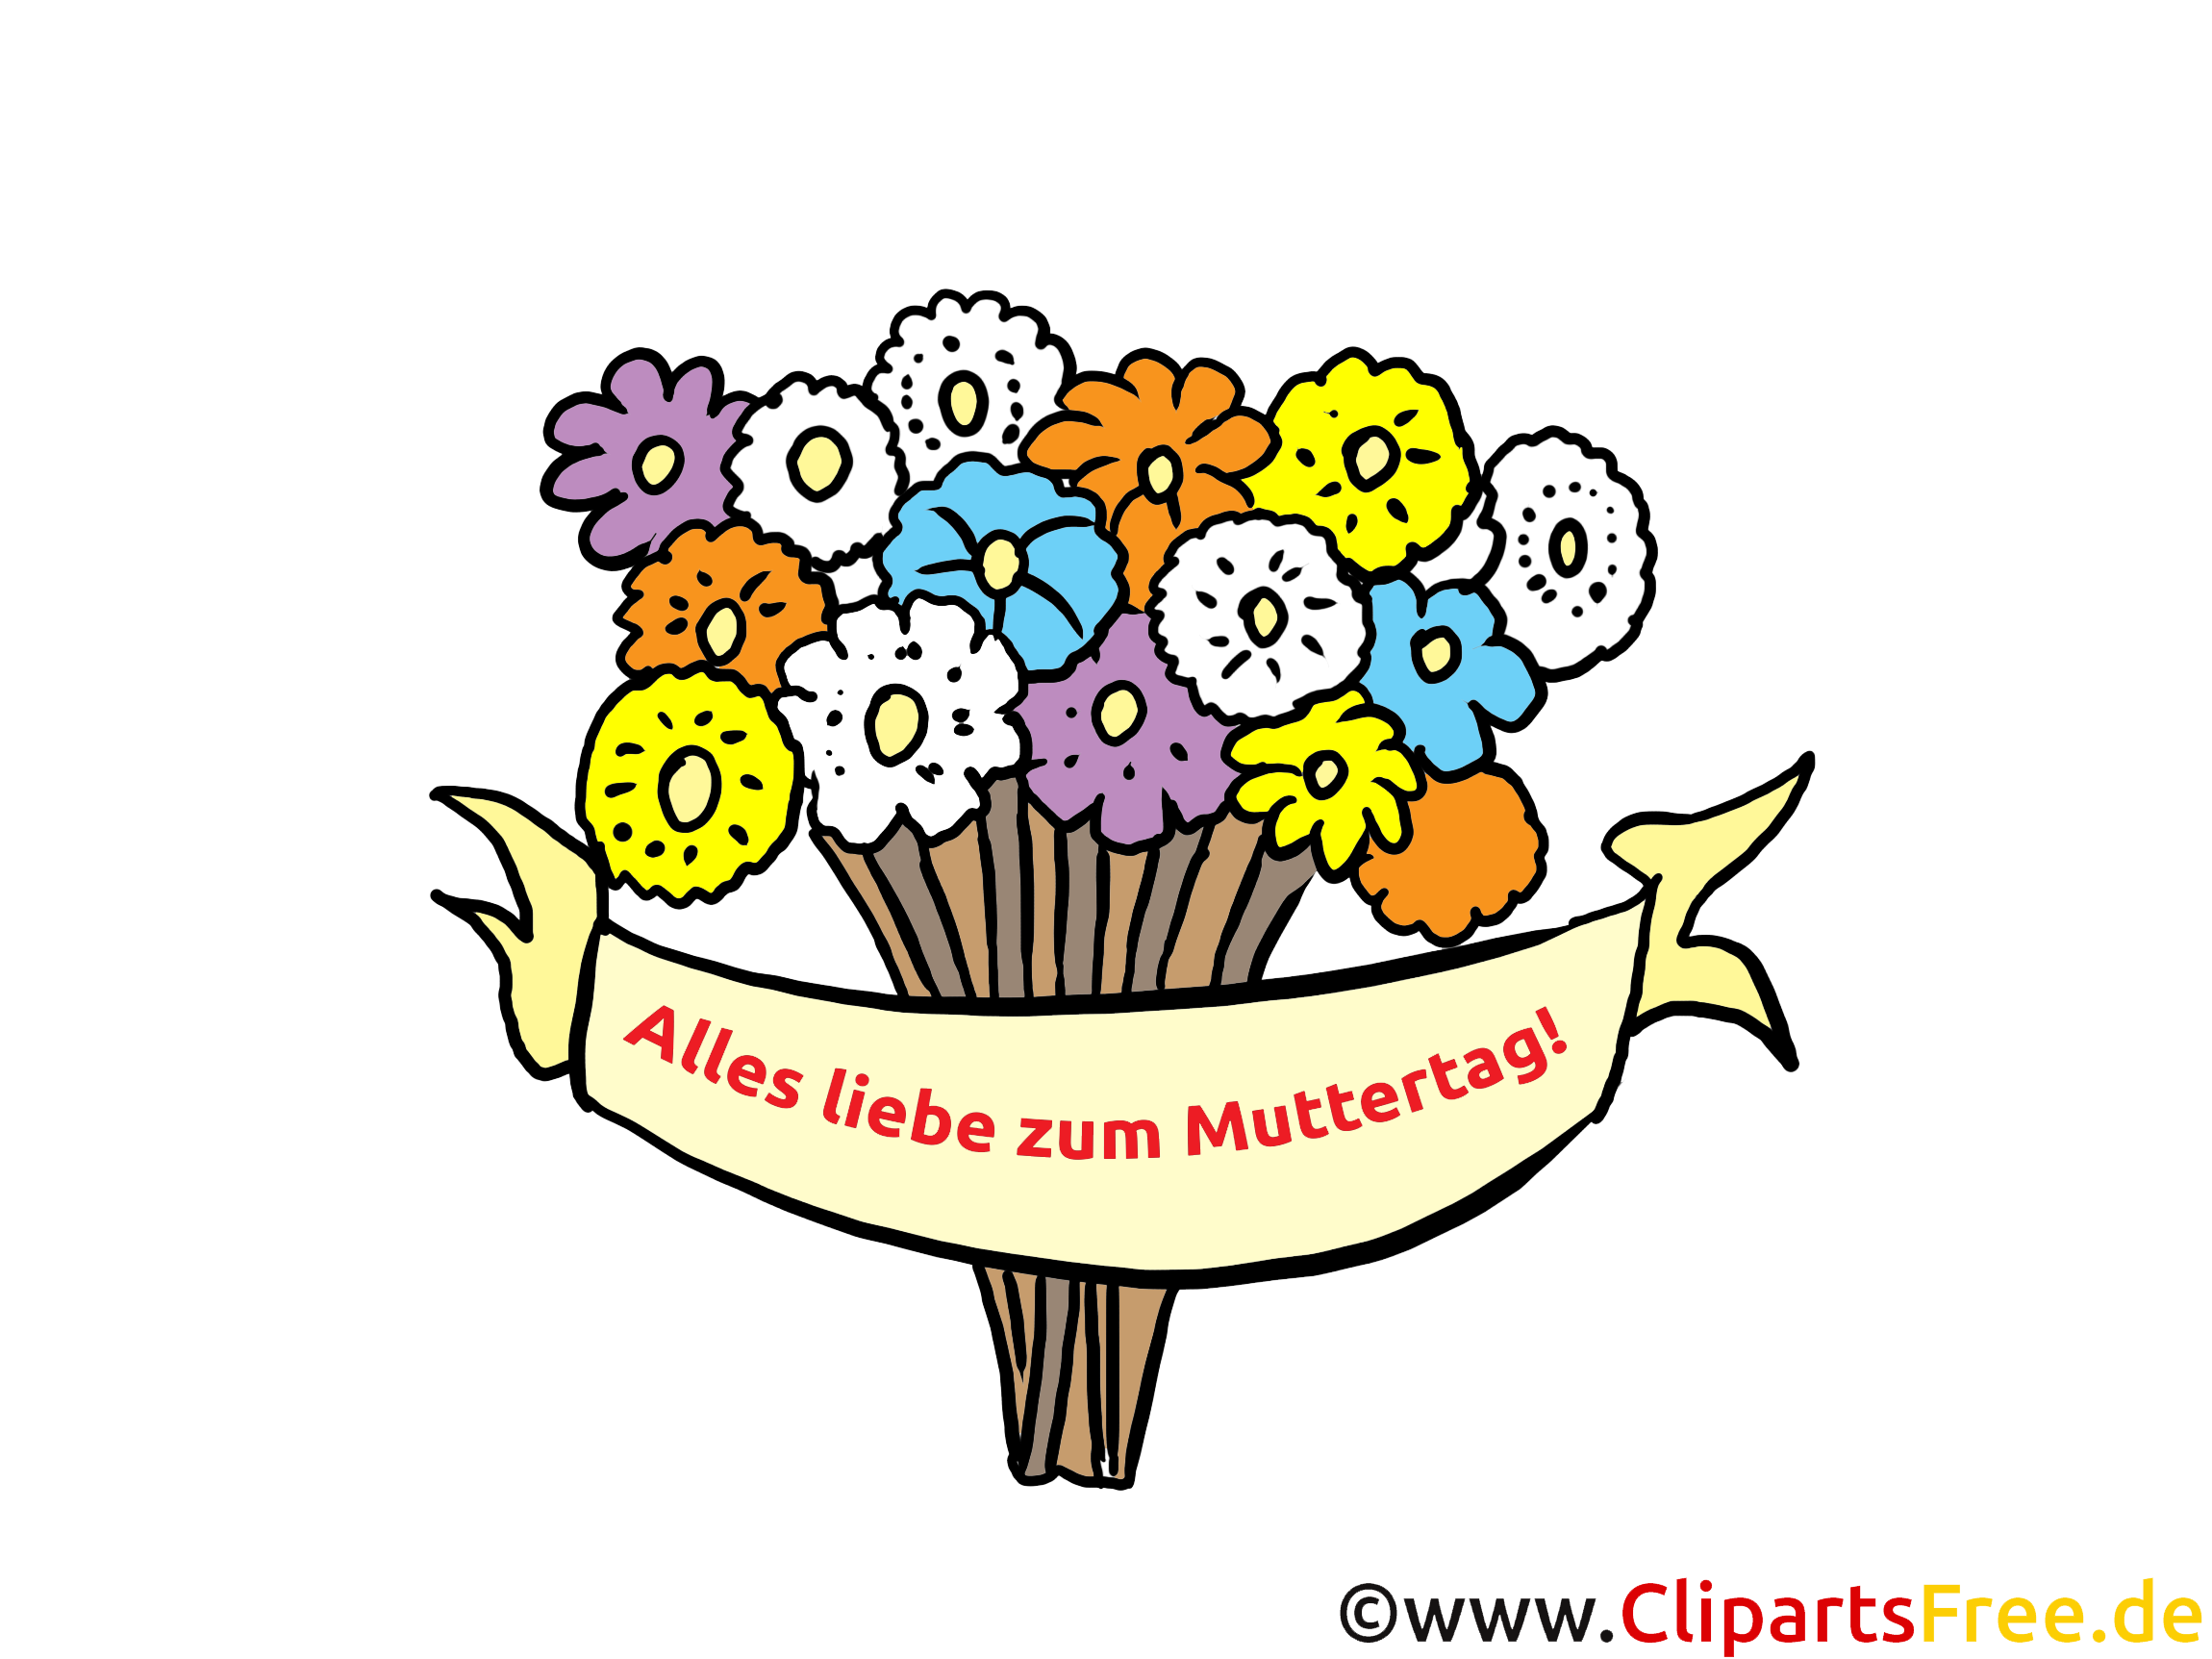 cliparts muttertag - photo #16